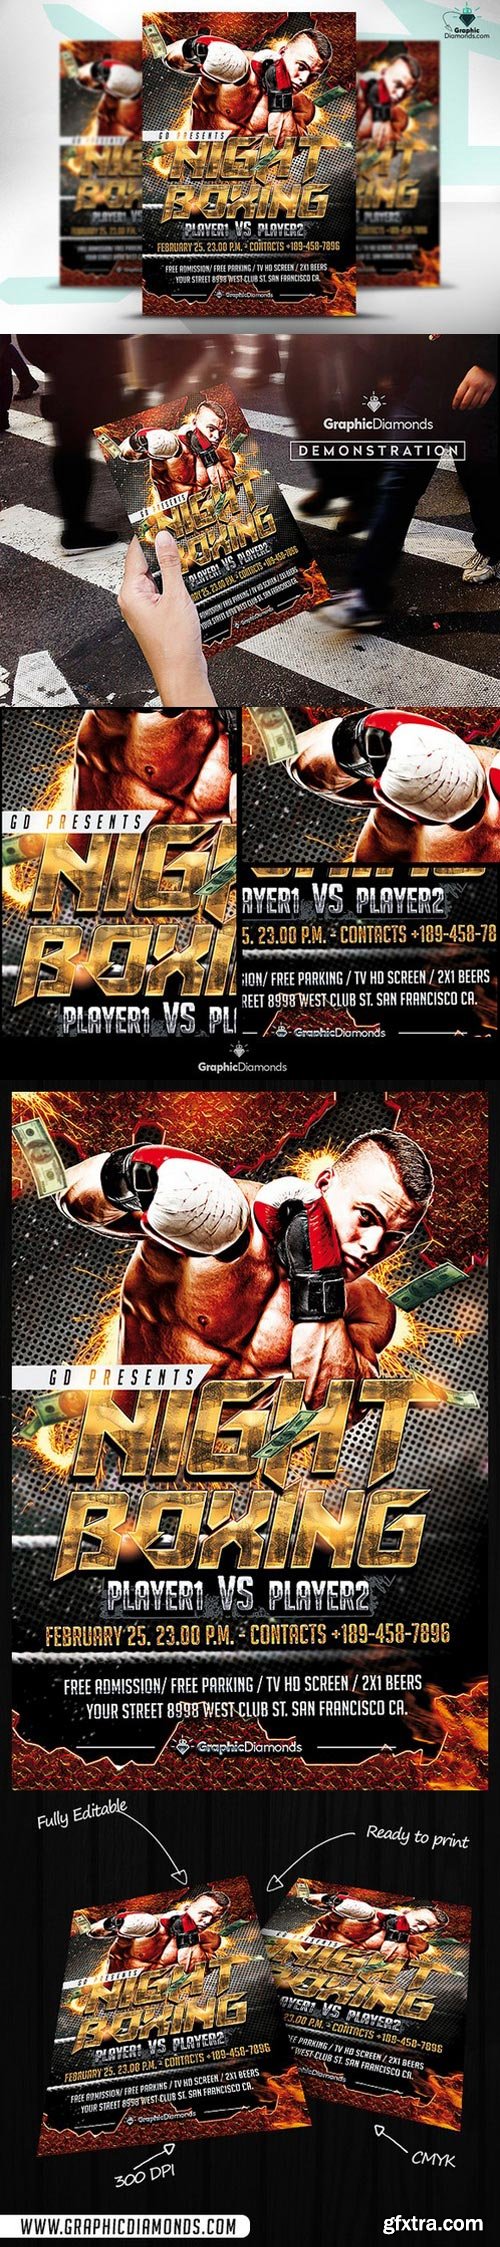 CM - Night Boxing Flyer Template 475977